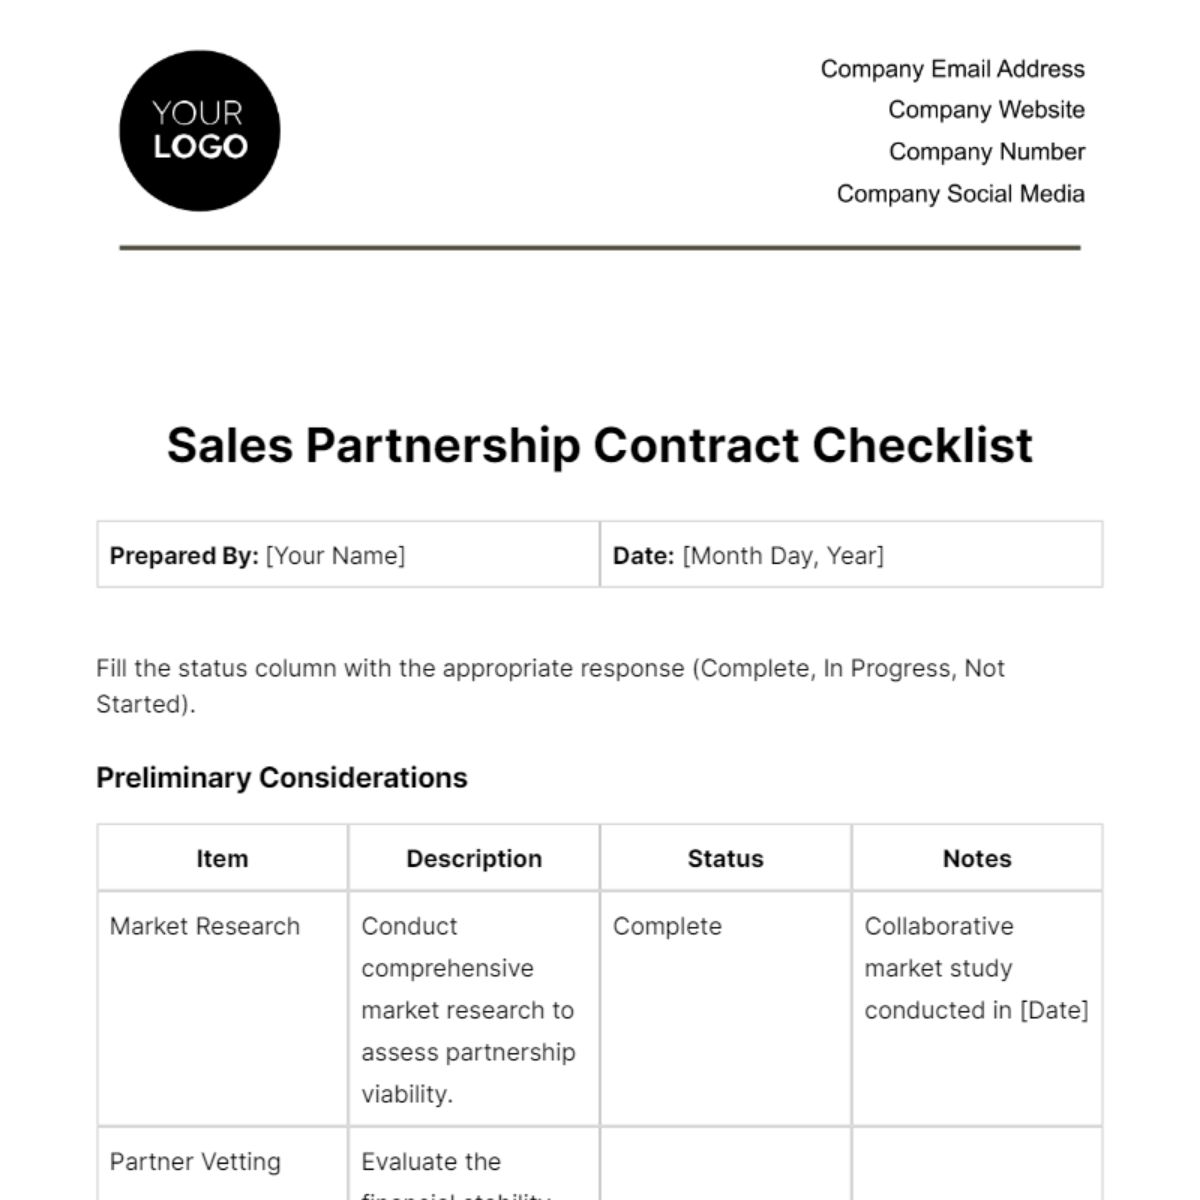 Free Sales Partnership Contract Checklist Template